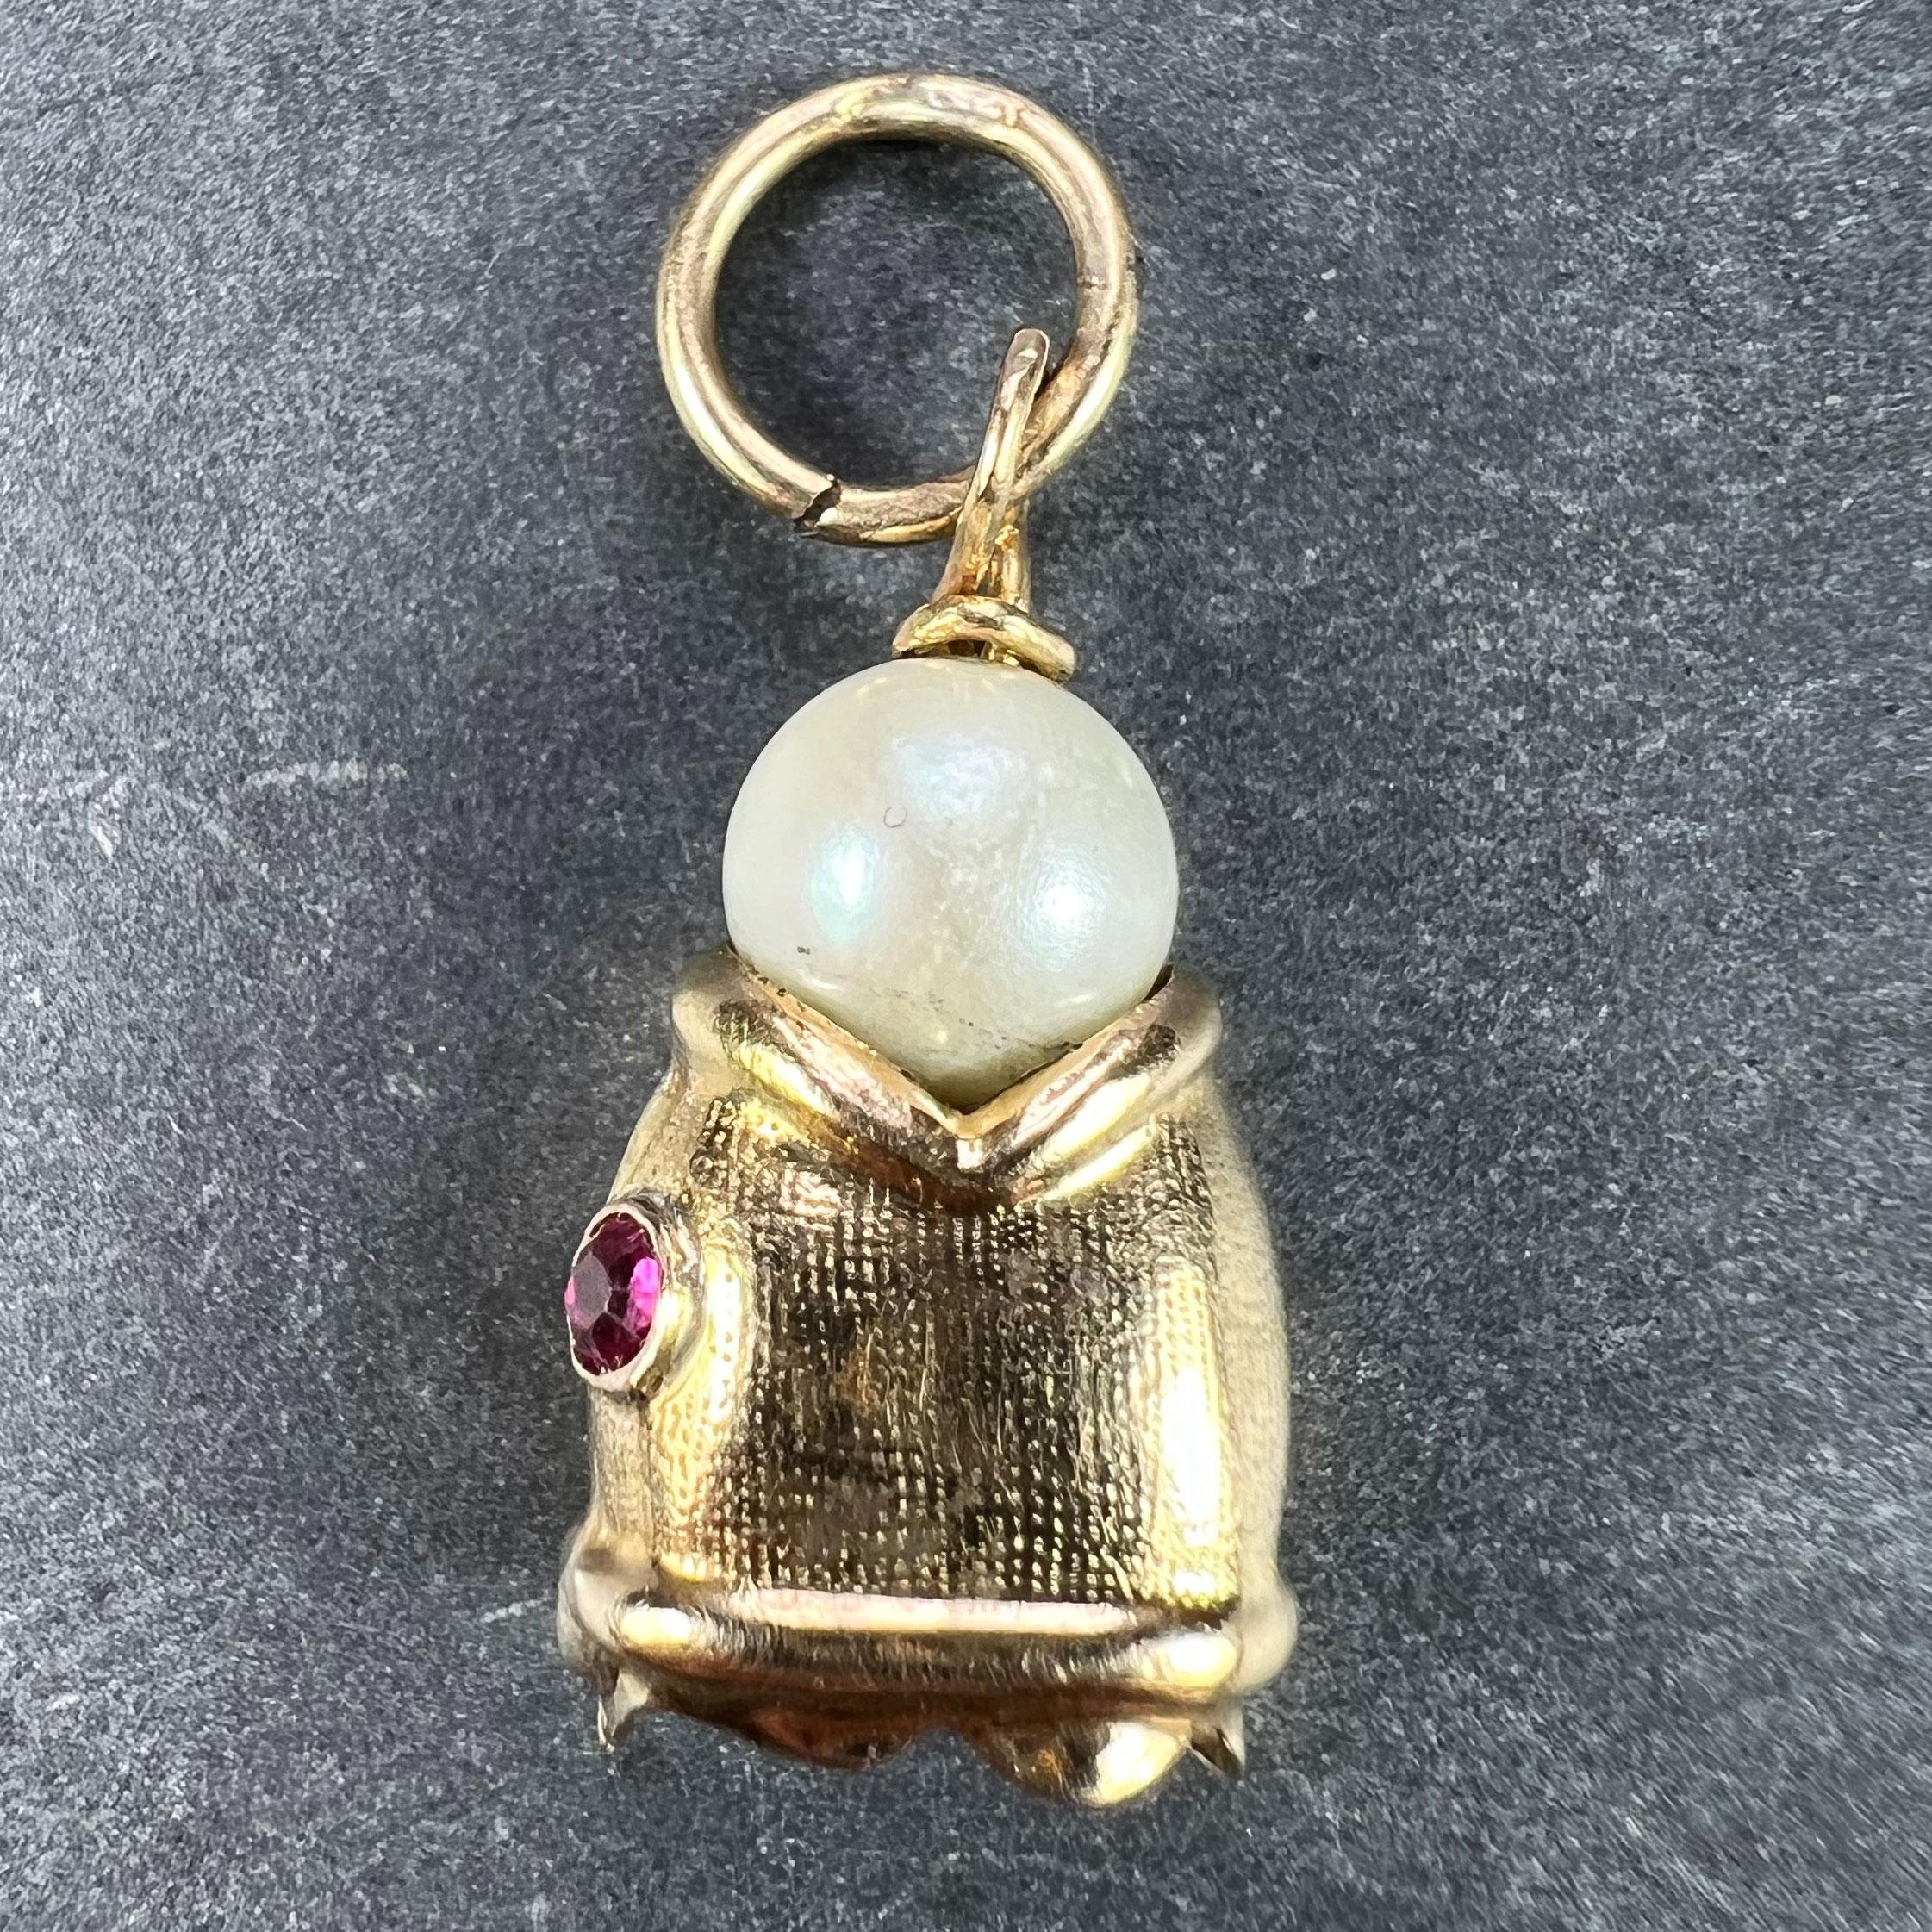 An 18 karat (18K) yellow gold charm pendant designed as a fish head with a cultured pearl in its mouth. Unmarked but tested for 18 karat gold.

Dimensions: 2 x 1.1 x 0.65 cm (not including jump ring)
Weight: 1.37 grams
(Chain not included)